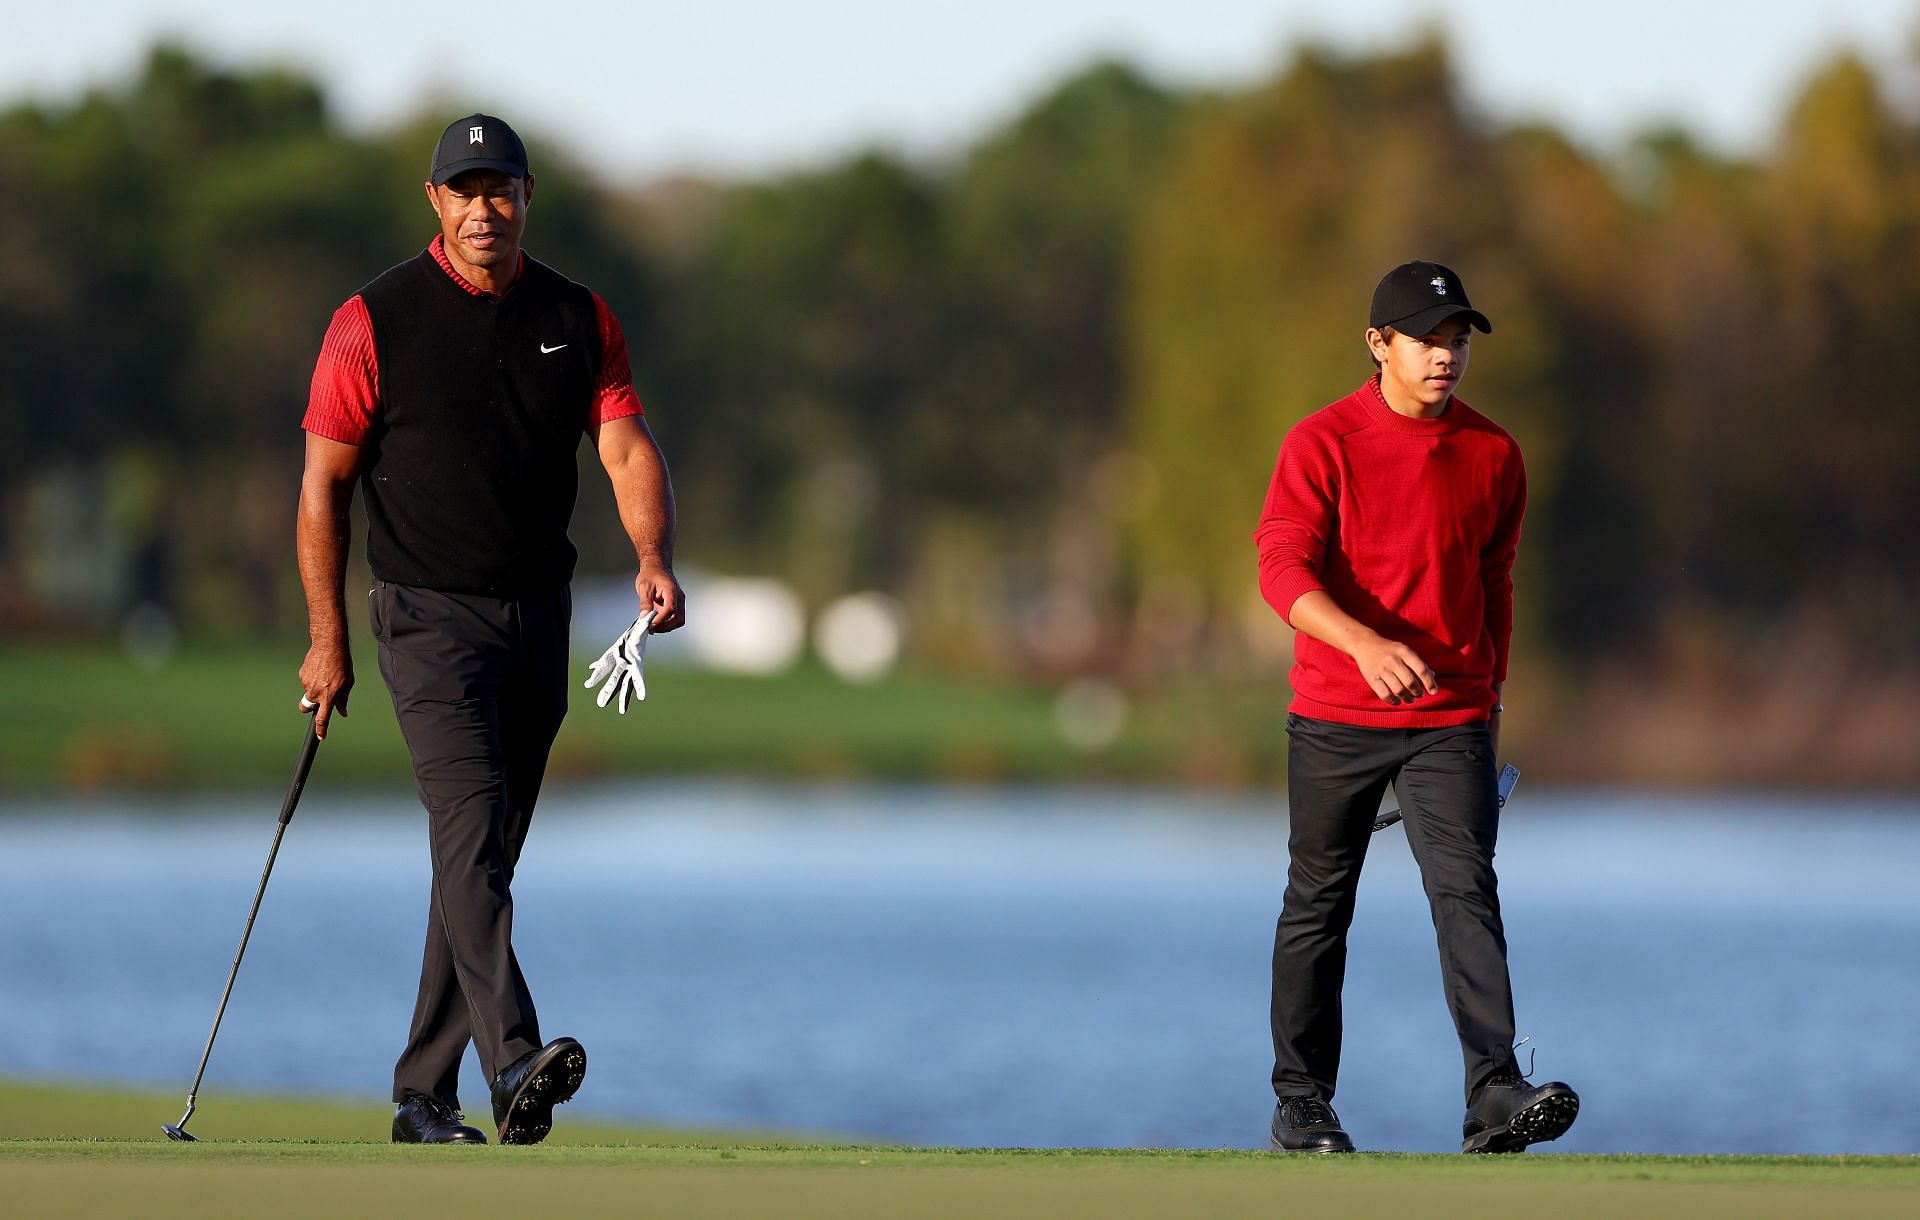 Tiger Woods named his son after Charlie Sifford